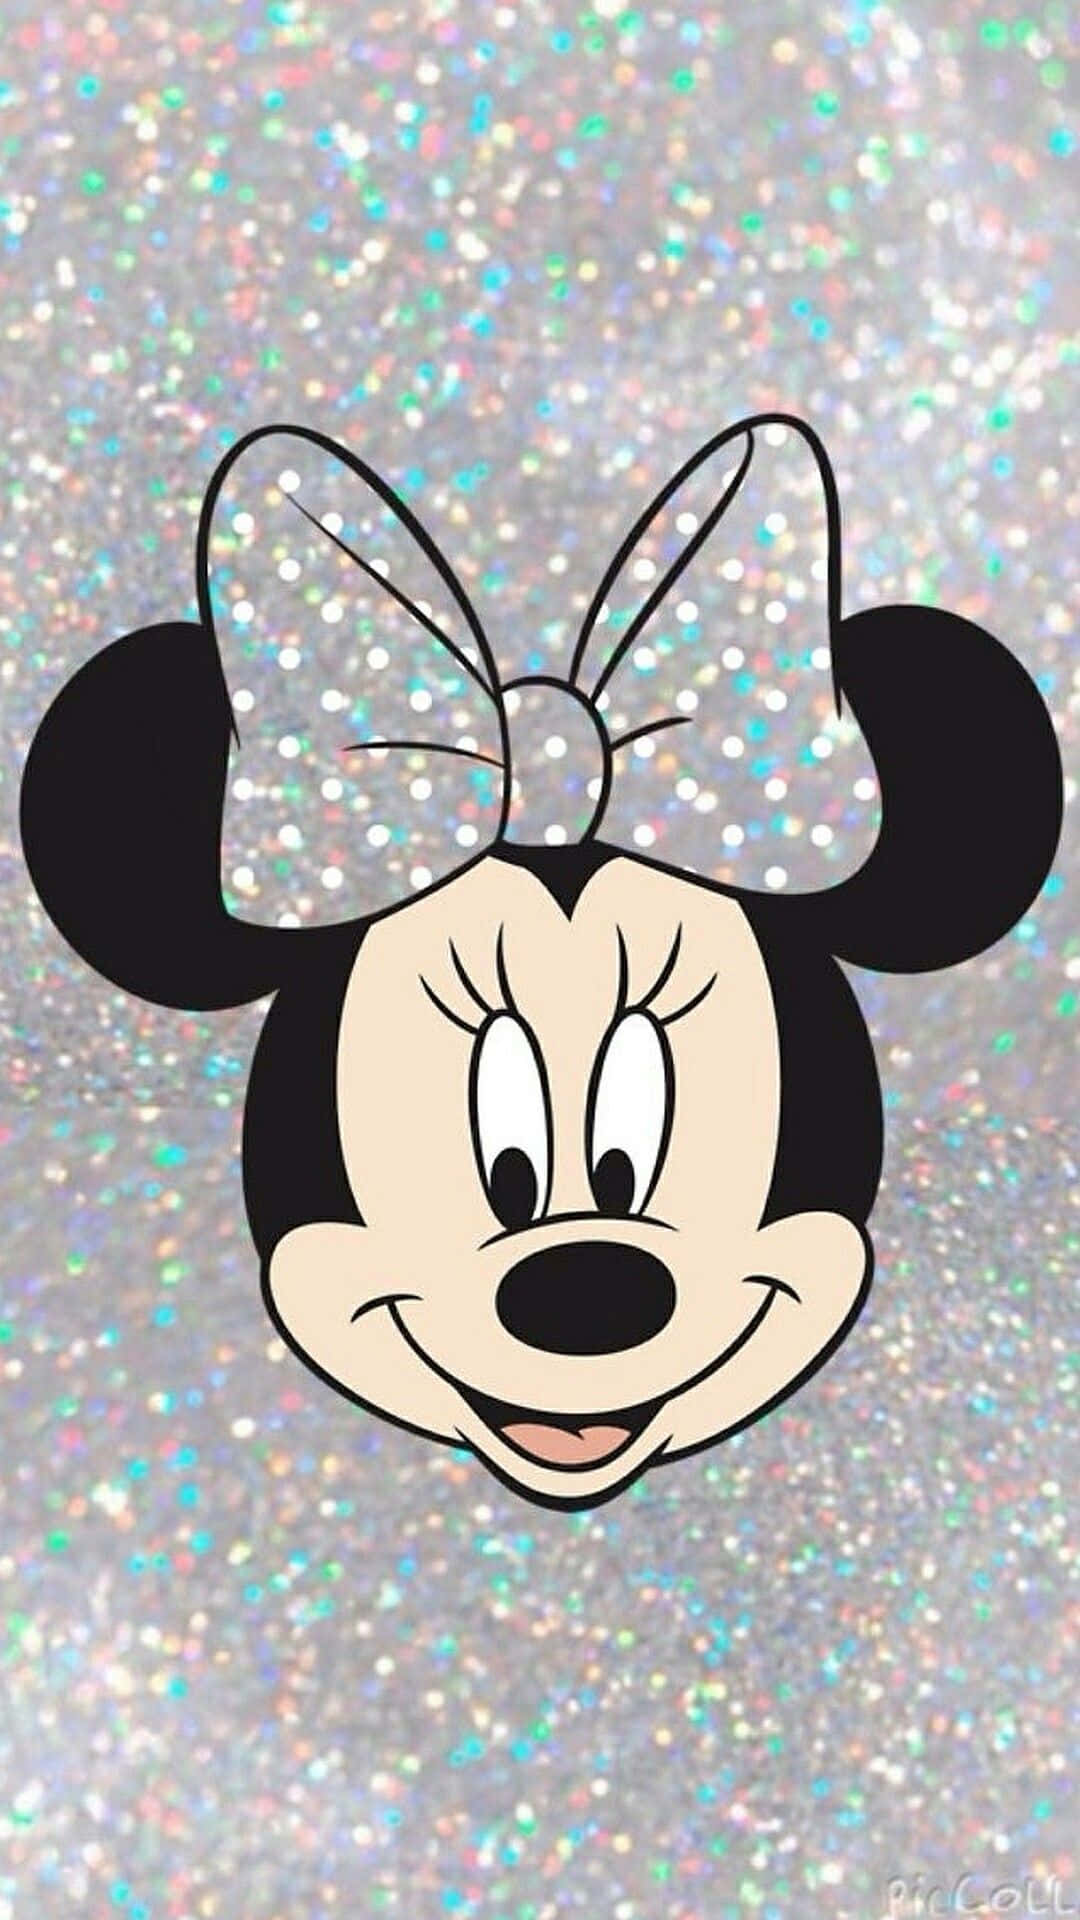 Charming Minnie Mouse Illustration